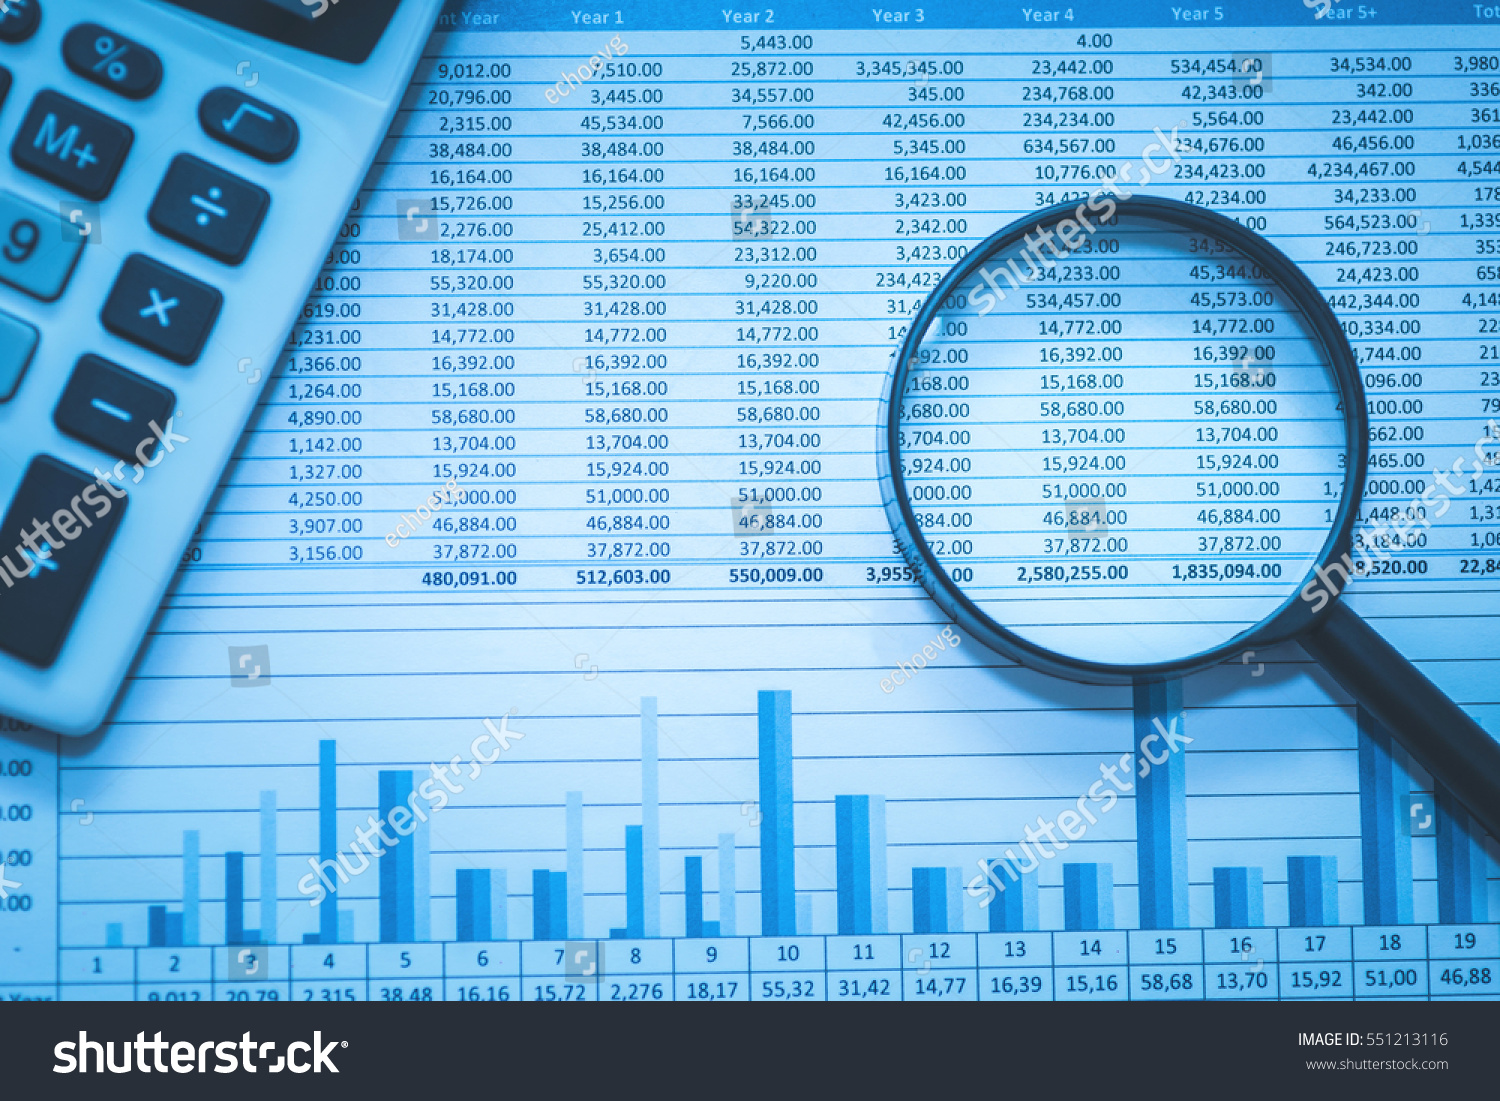 Spreadsheet bank accounts accounting with calculator and magnifying glass. Concept for financial fraud investigation, audit and analysis. #551213116